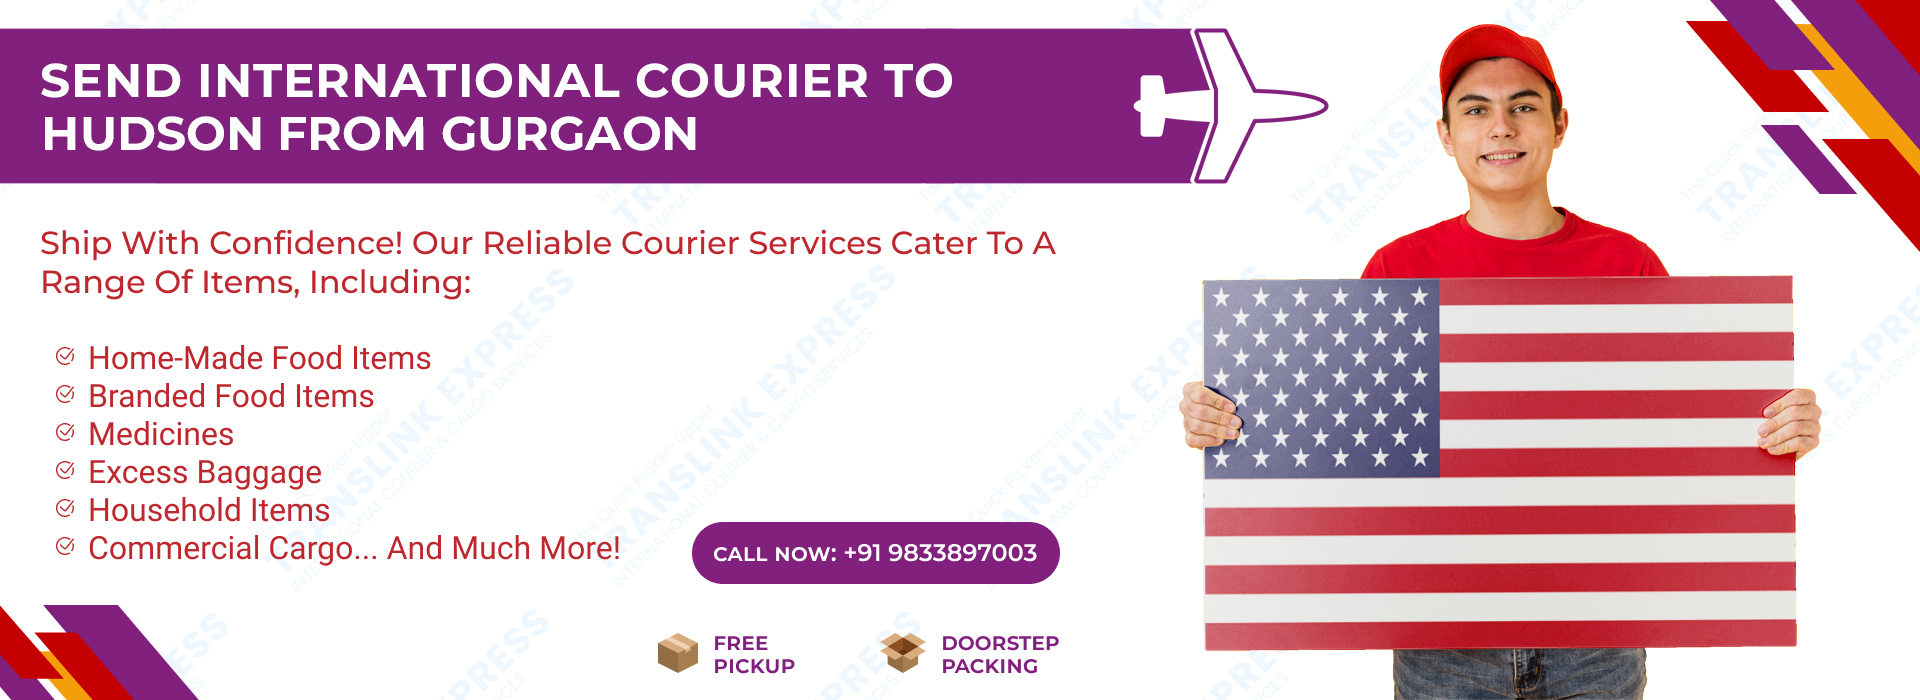 Courier to Hudson From Gurgaon